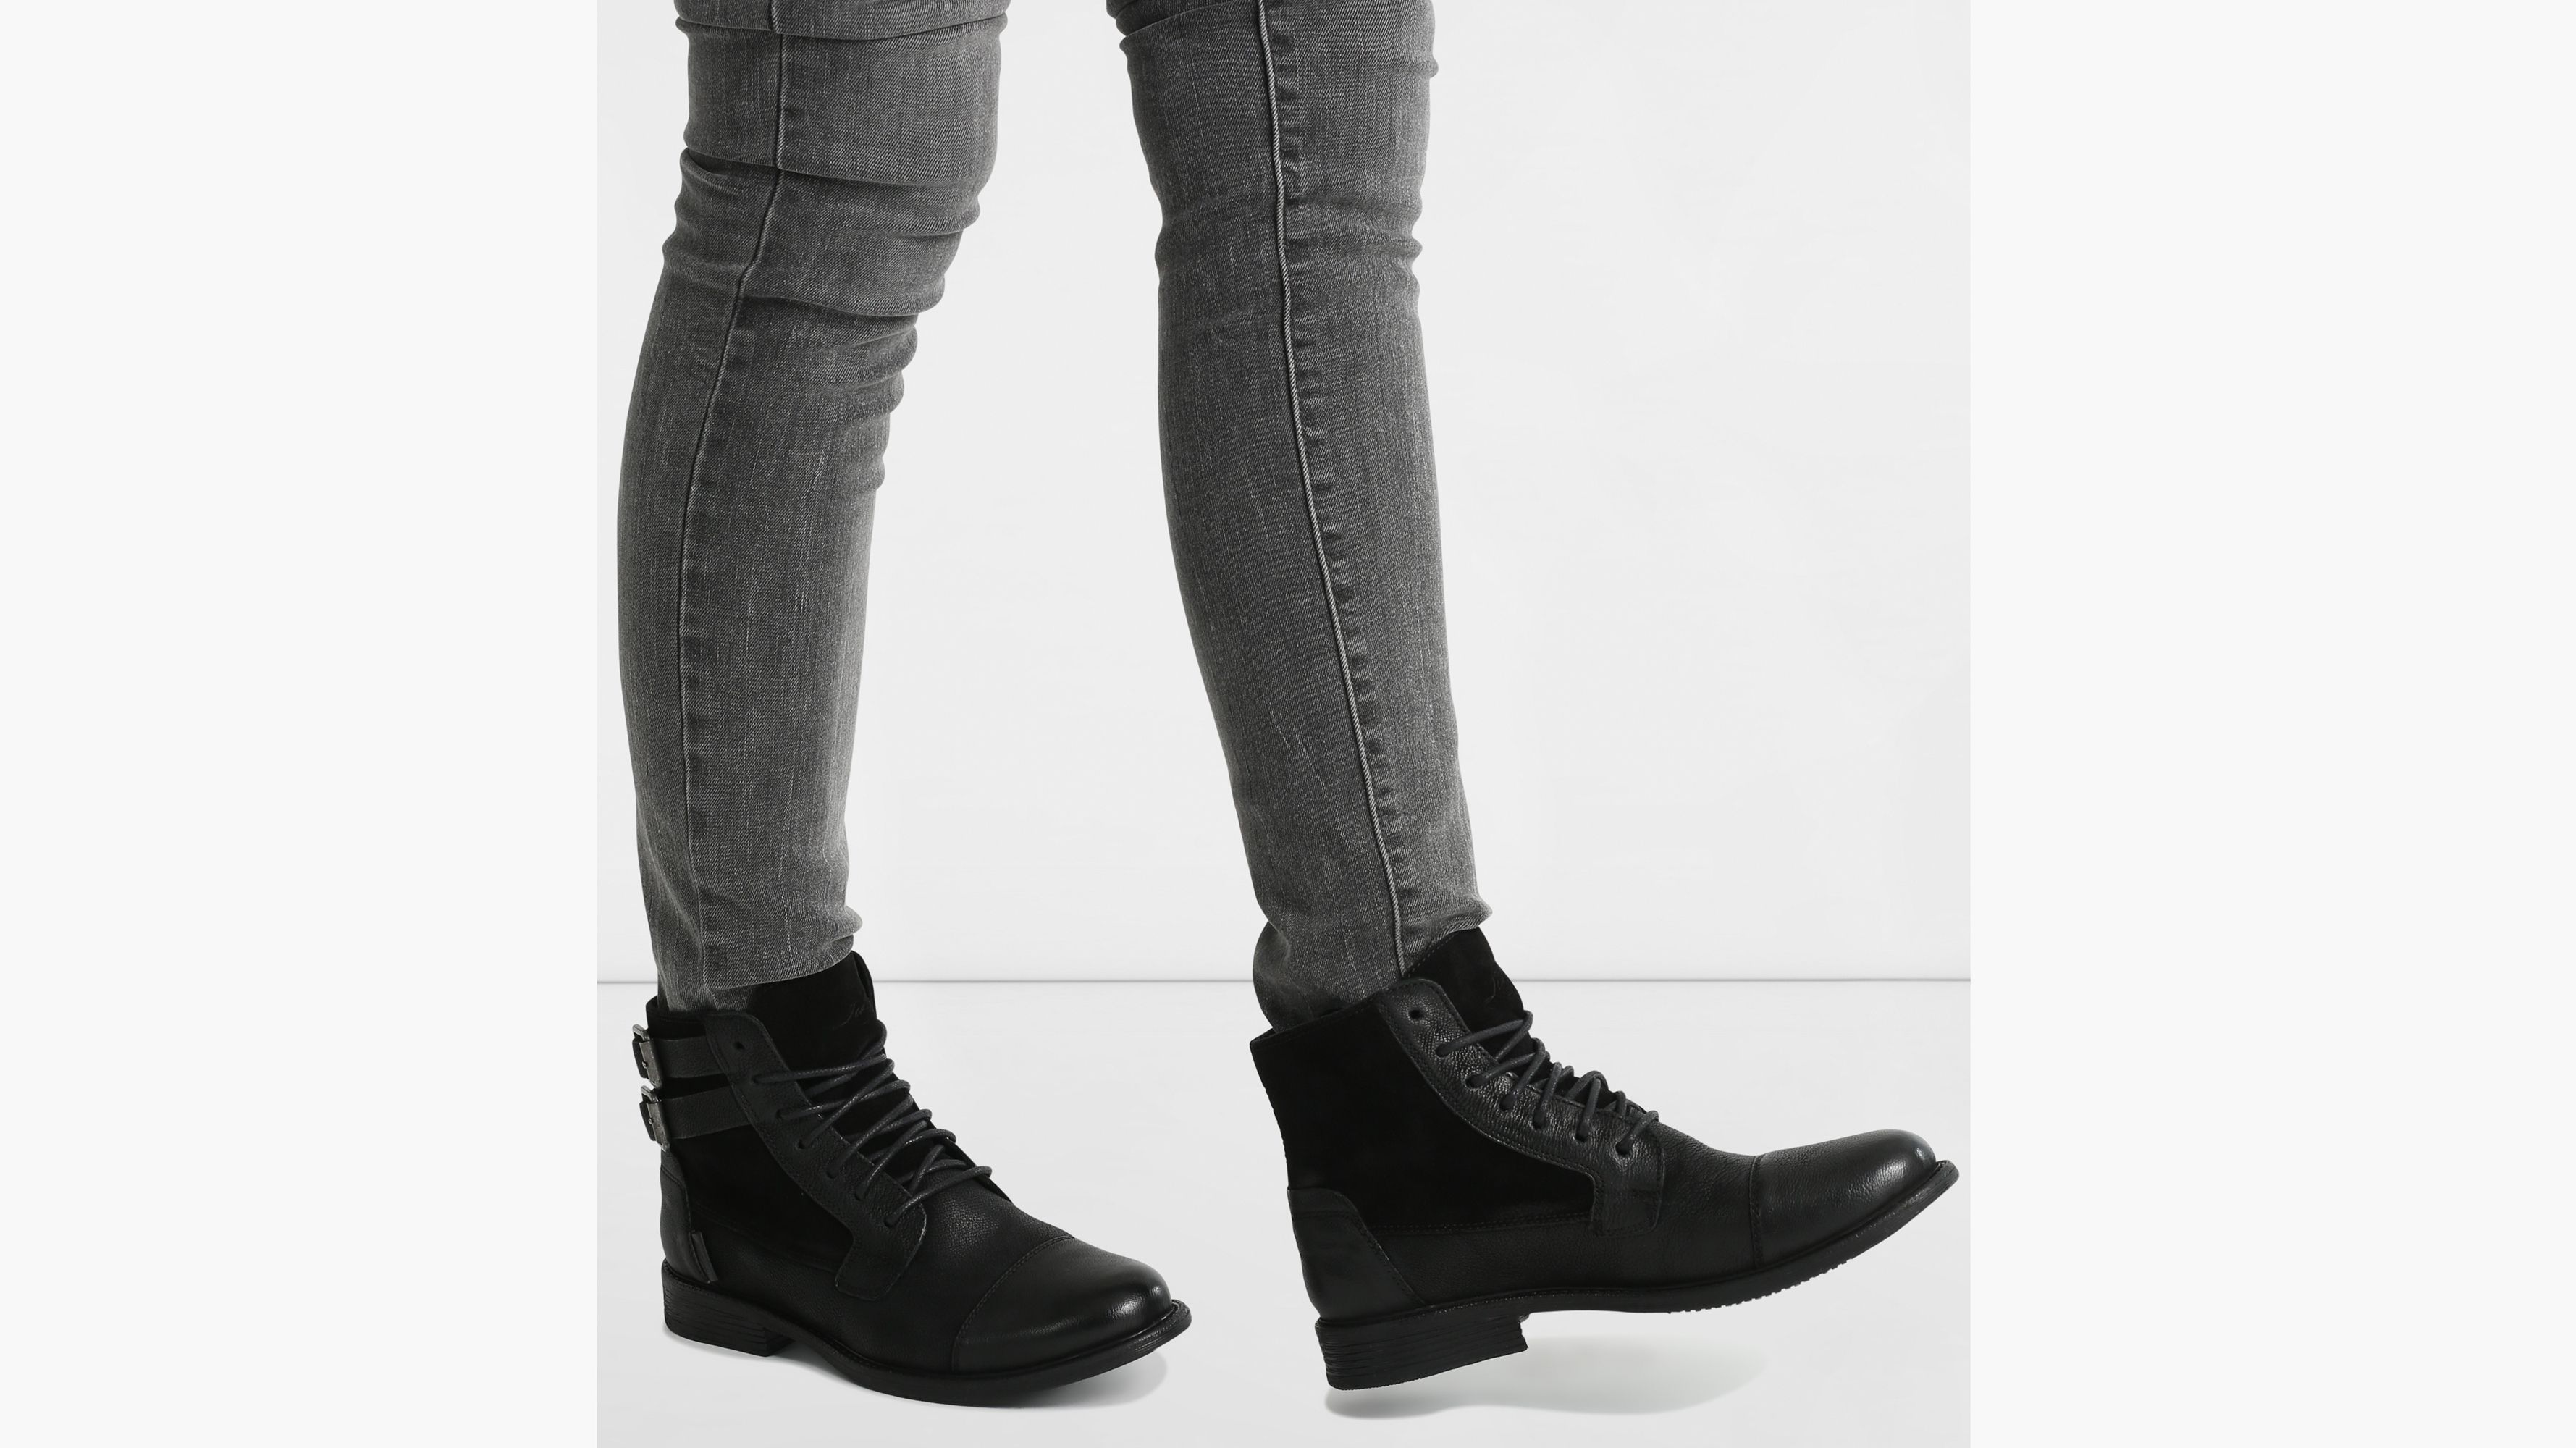 Buy > levi s boots > in stock